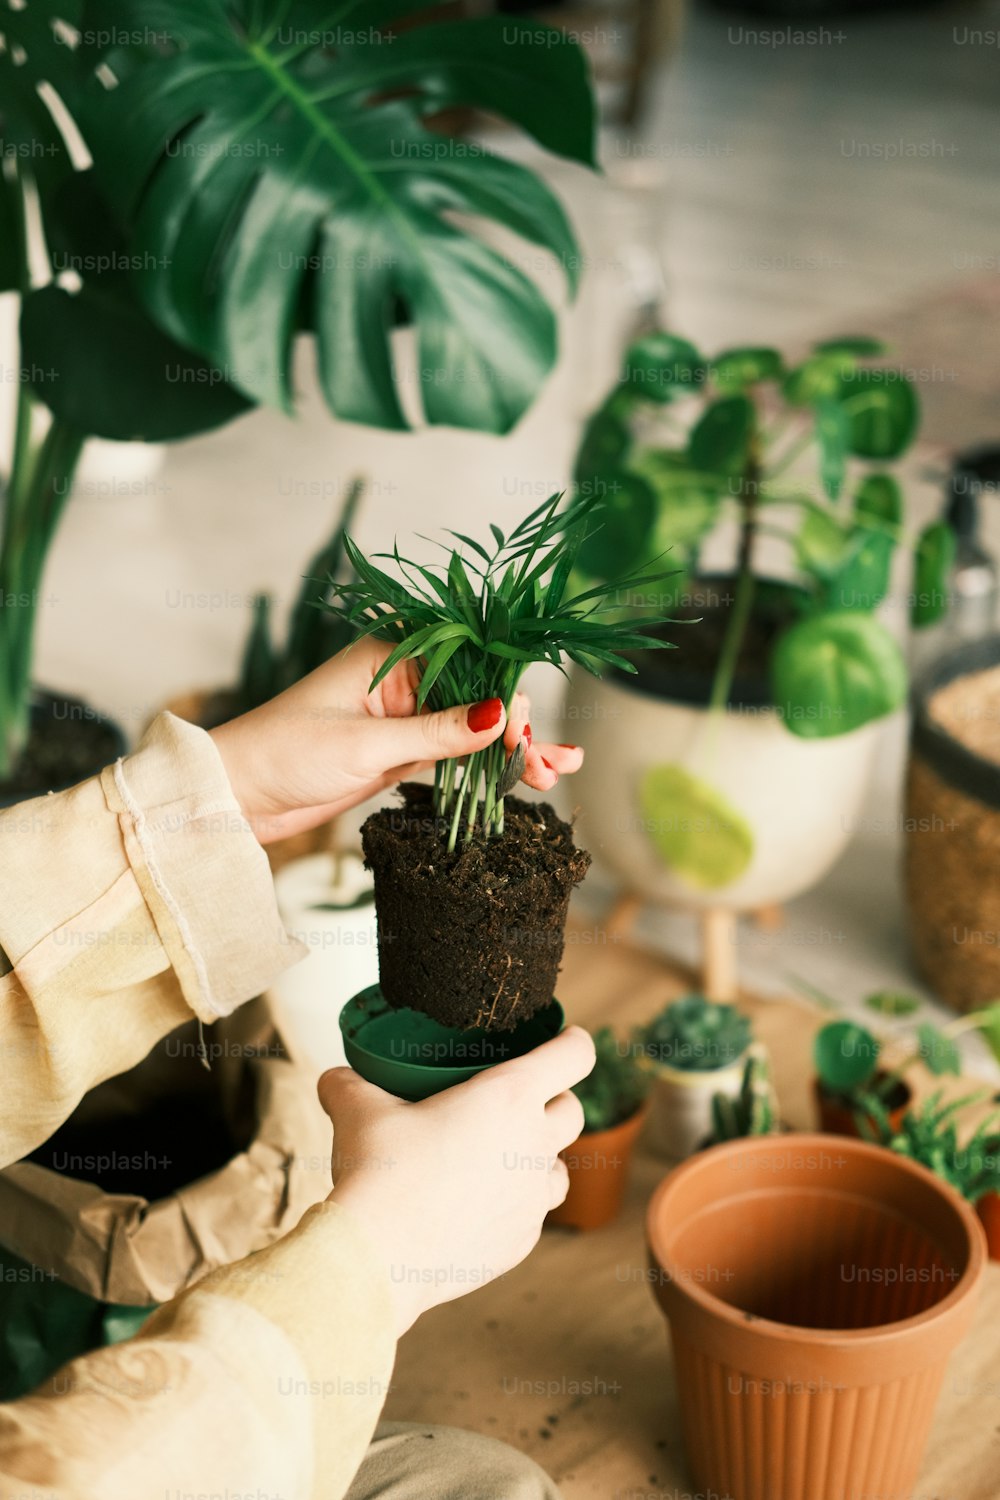 a person is holding a plant in their hand